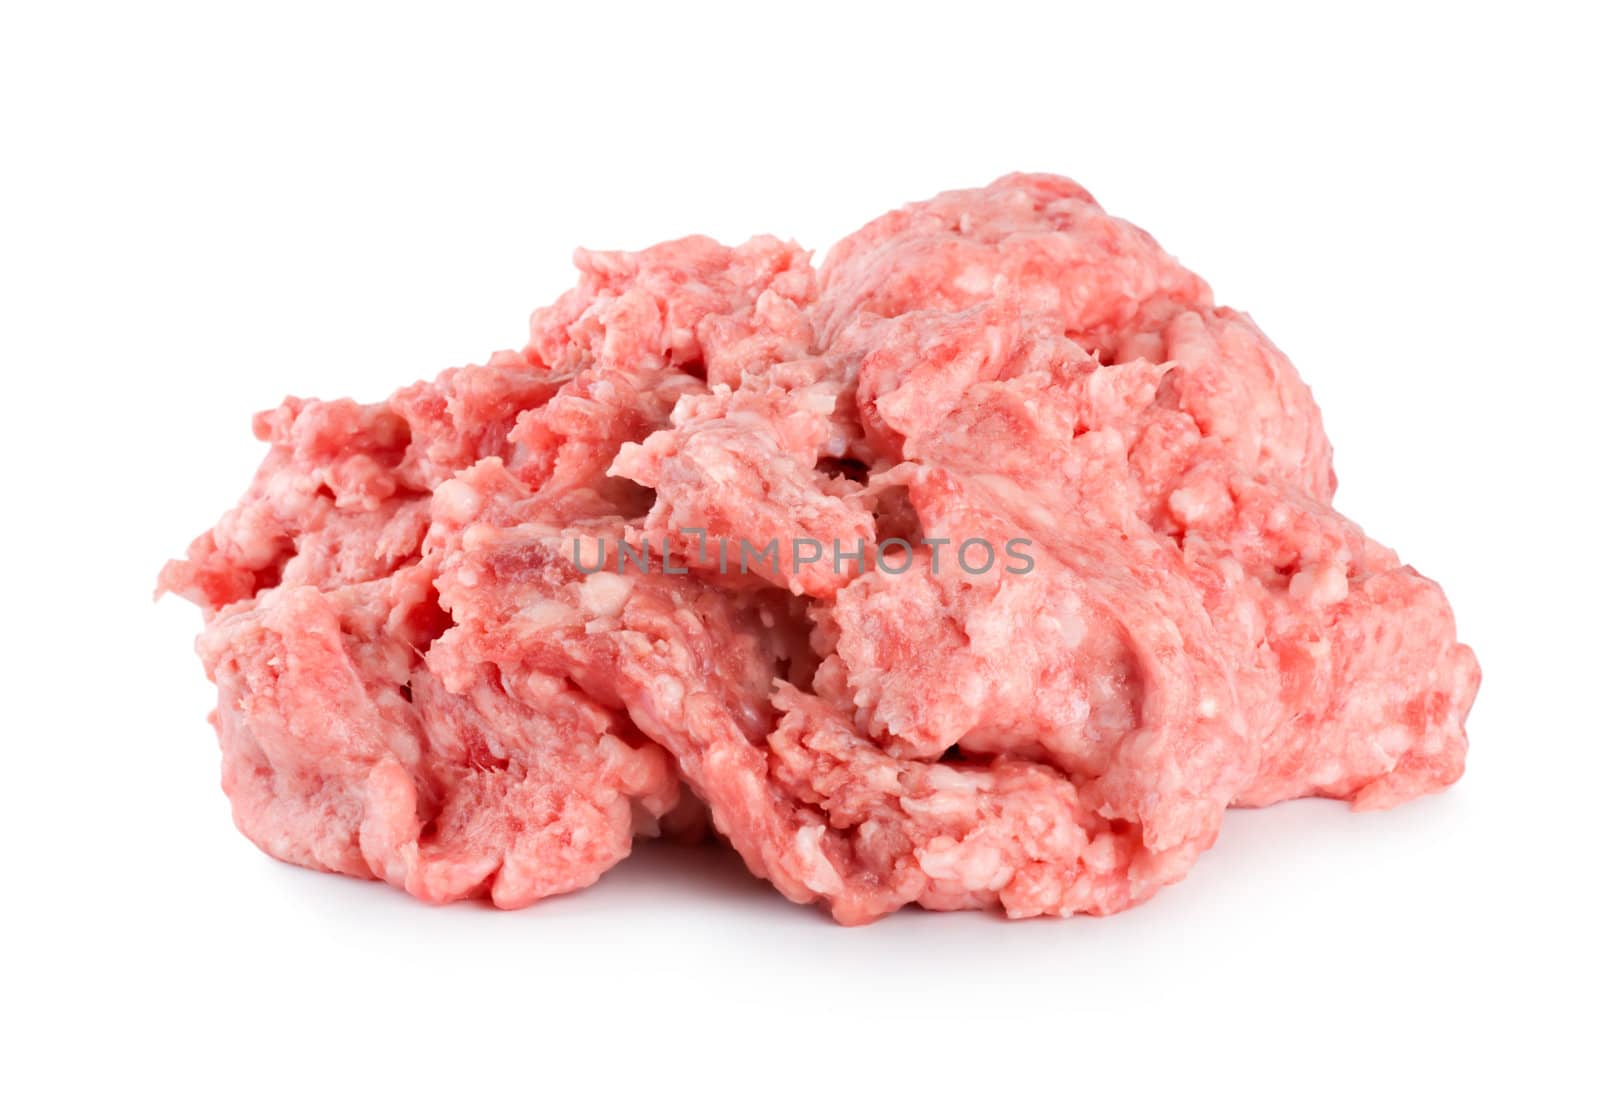 Minced meat by Givaga